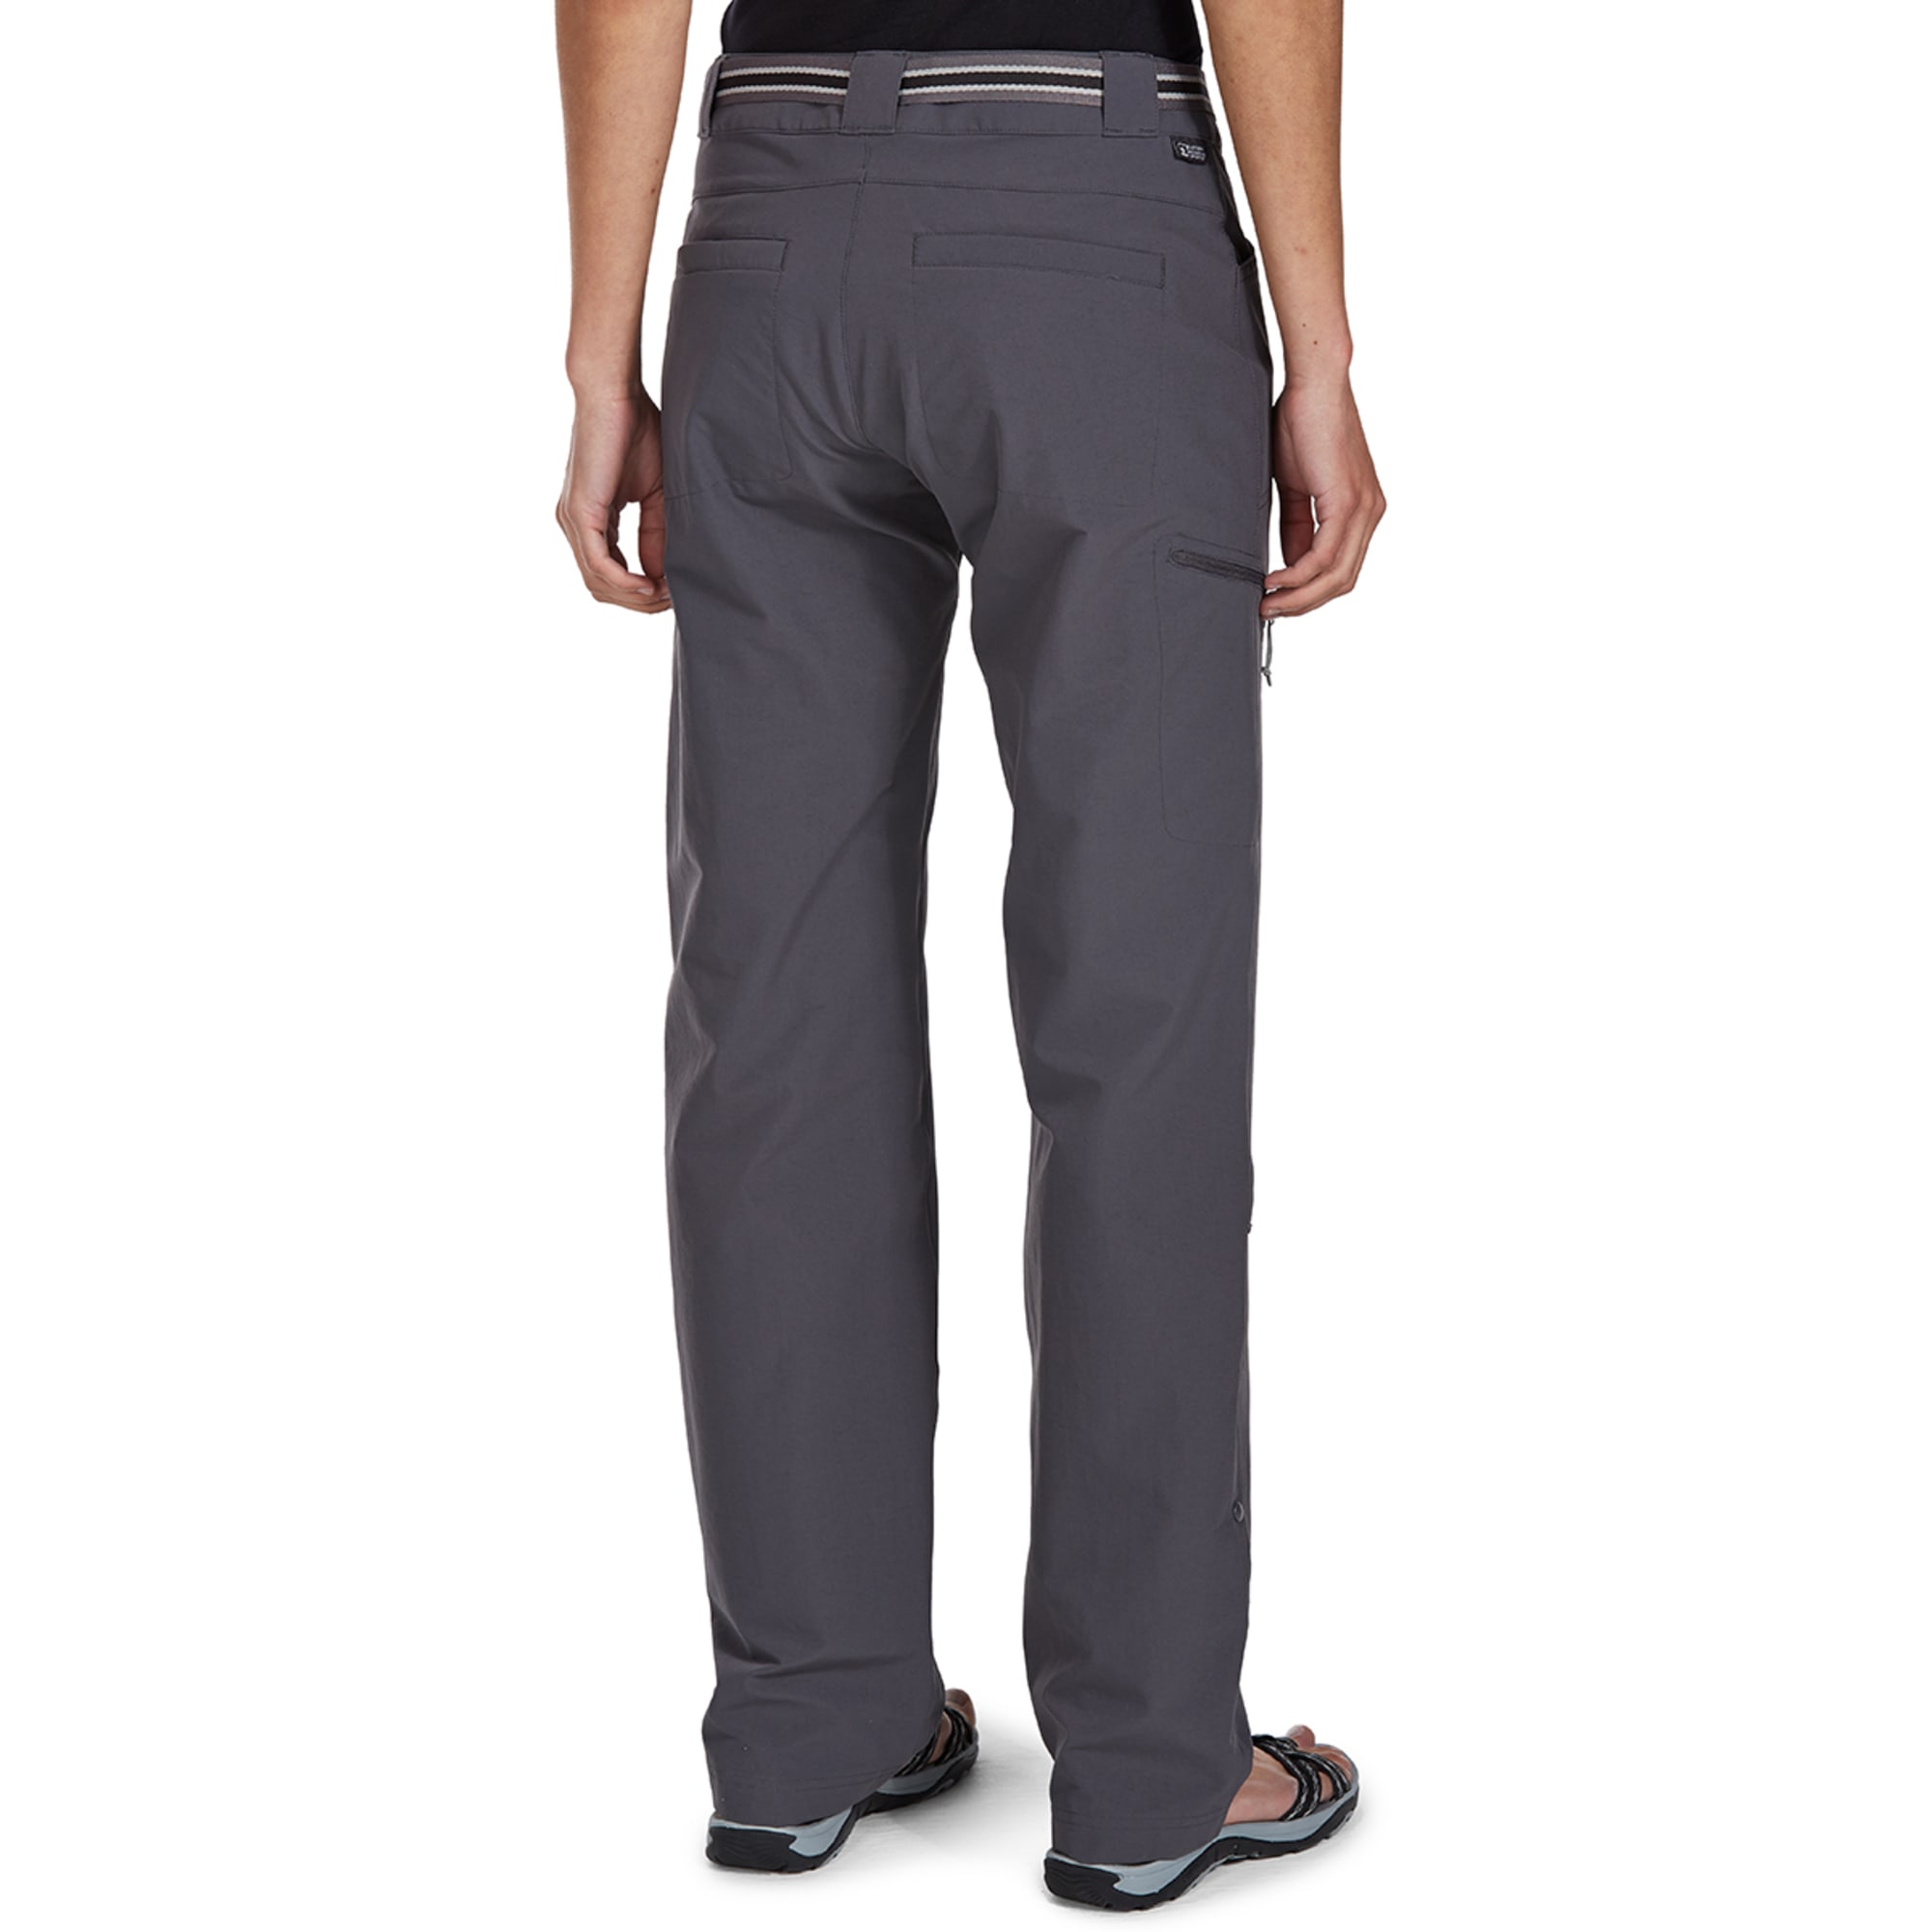 40% OFF EMS Fencemender & Compass Pants - Eastern Mountain Sports Email  Archive